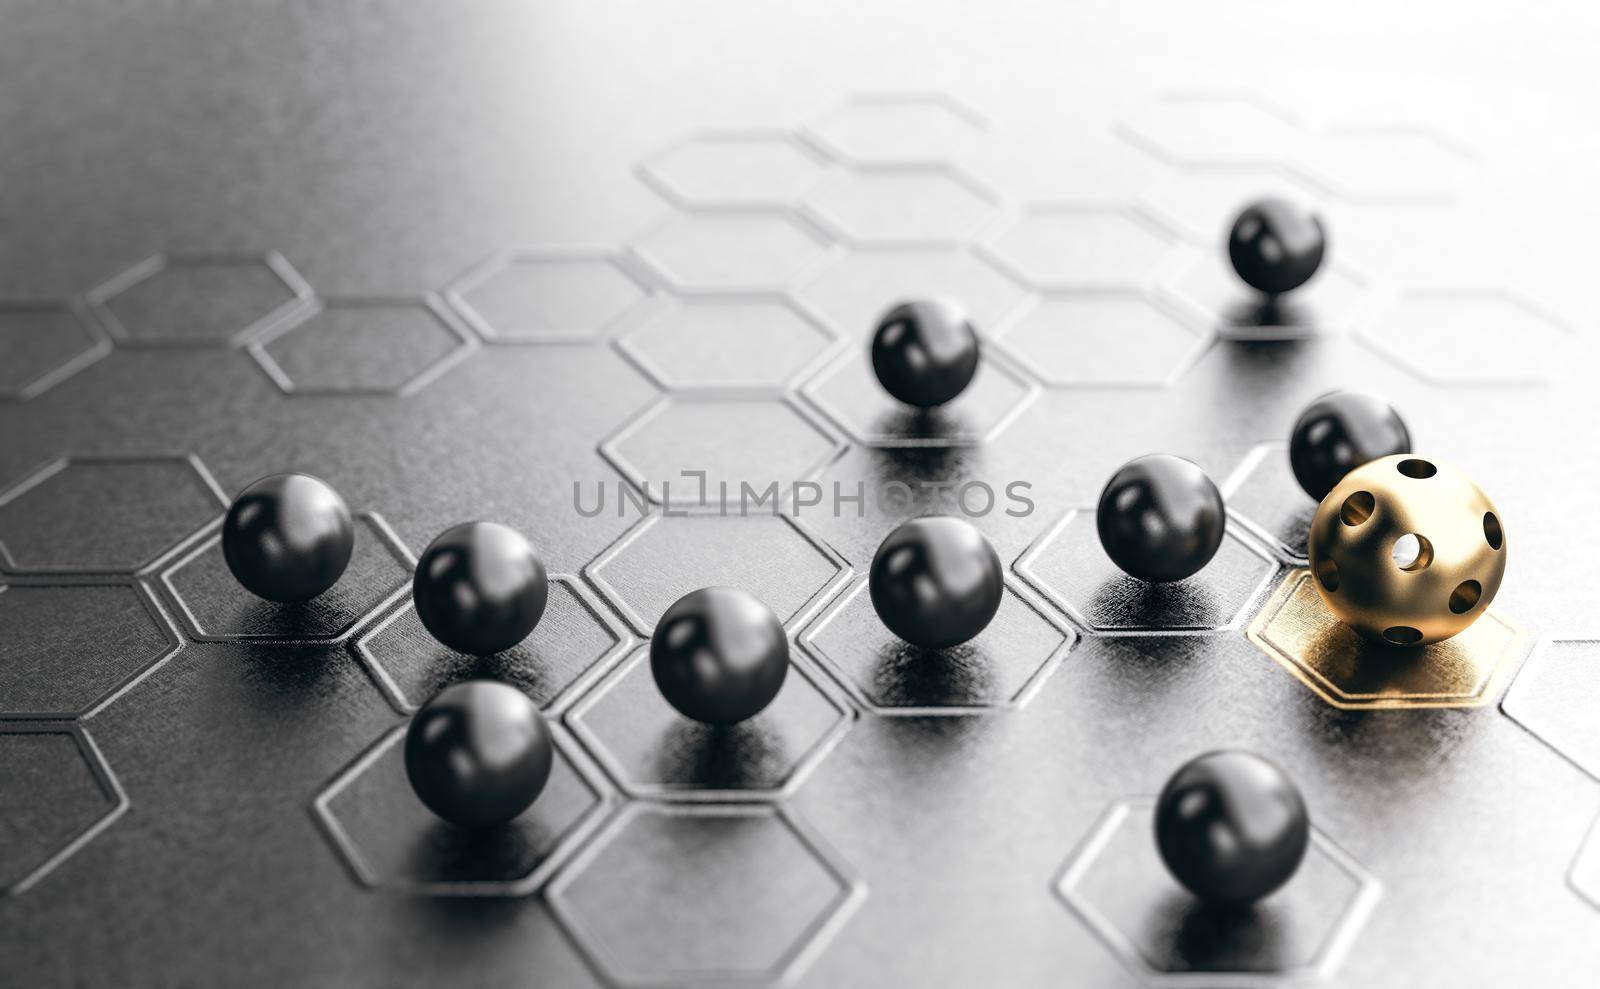 Many spheres and a different one with golden color and holes over black background. Concept of brand differentiation strategy. 3D illustration.